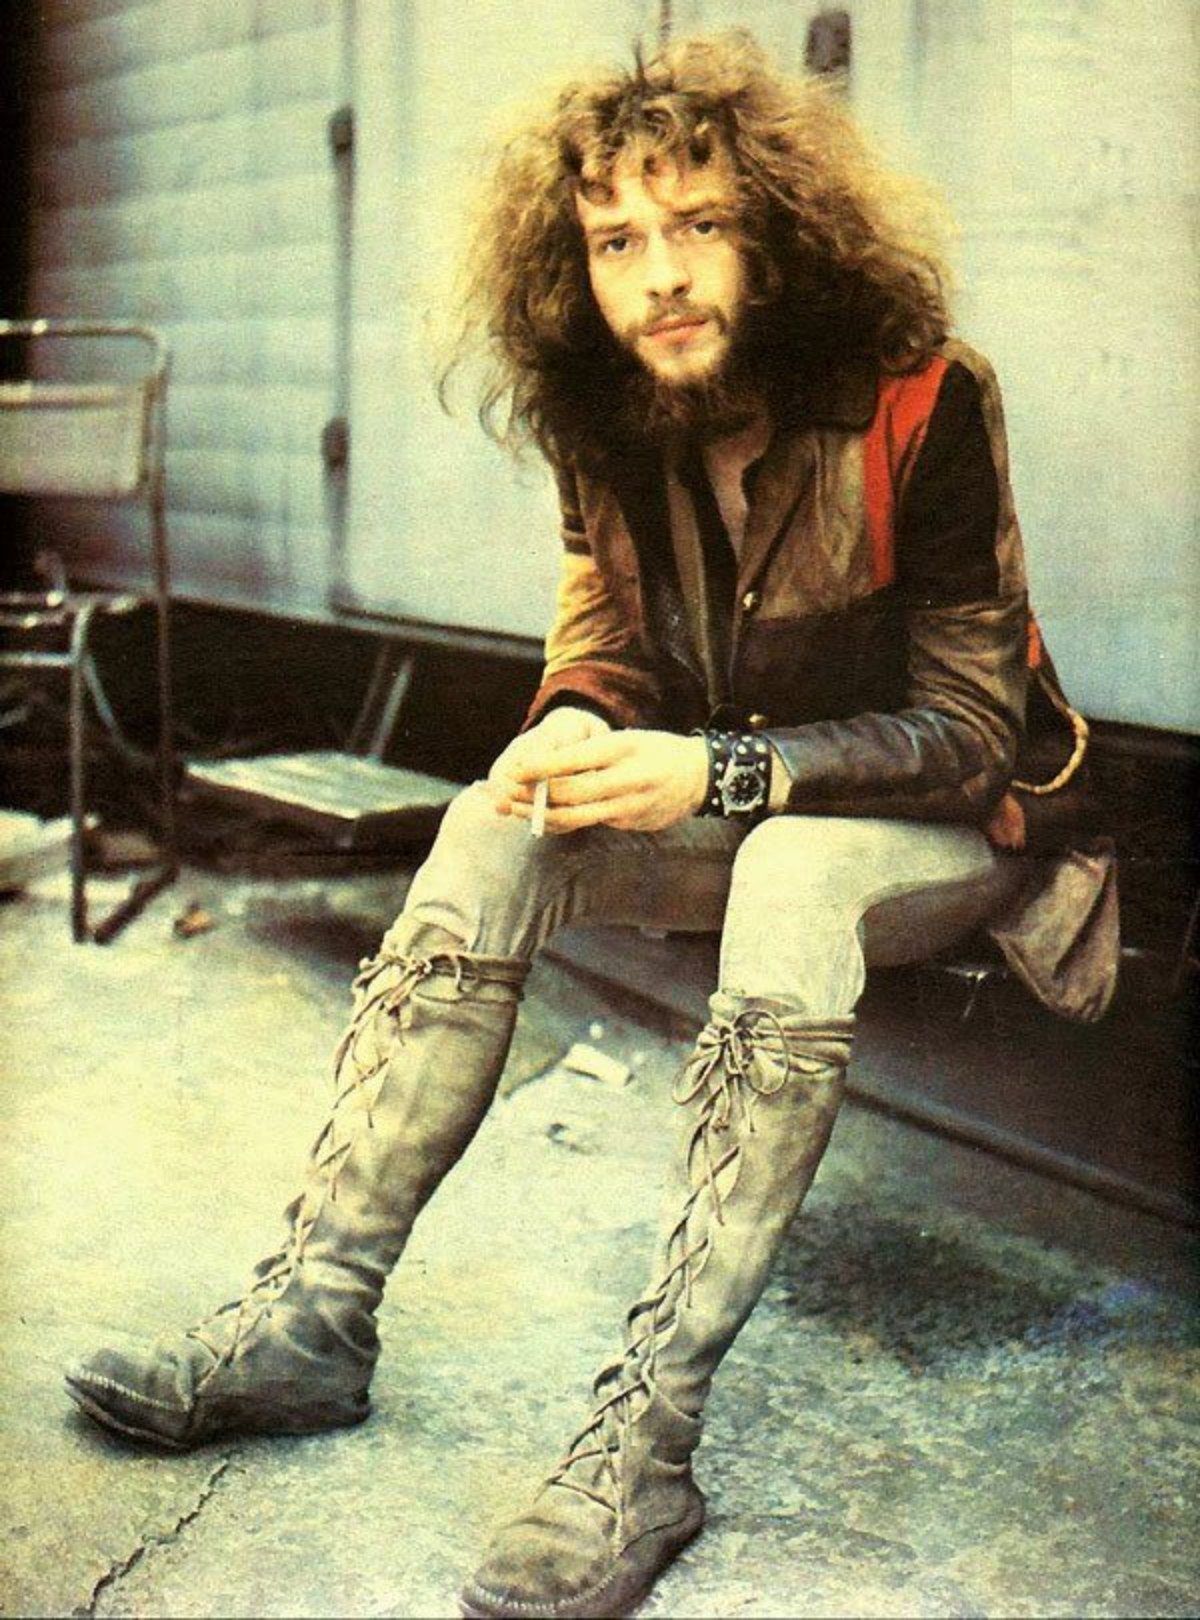 Young Ian Anderson